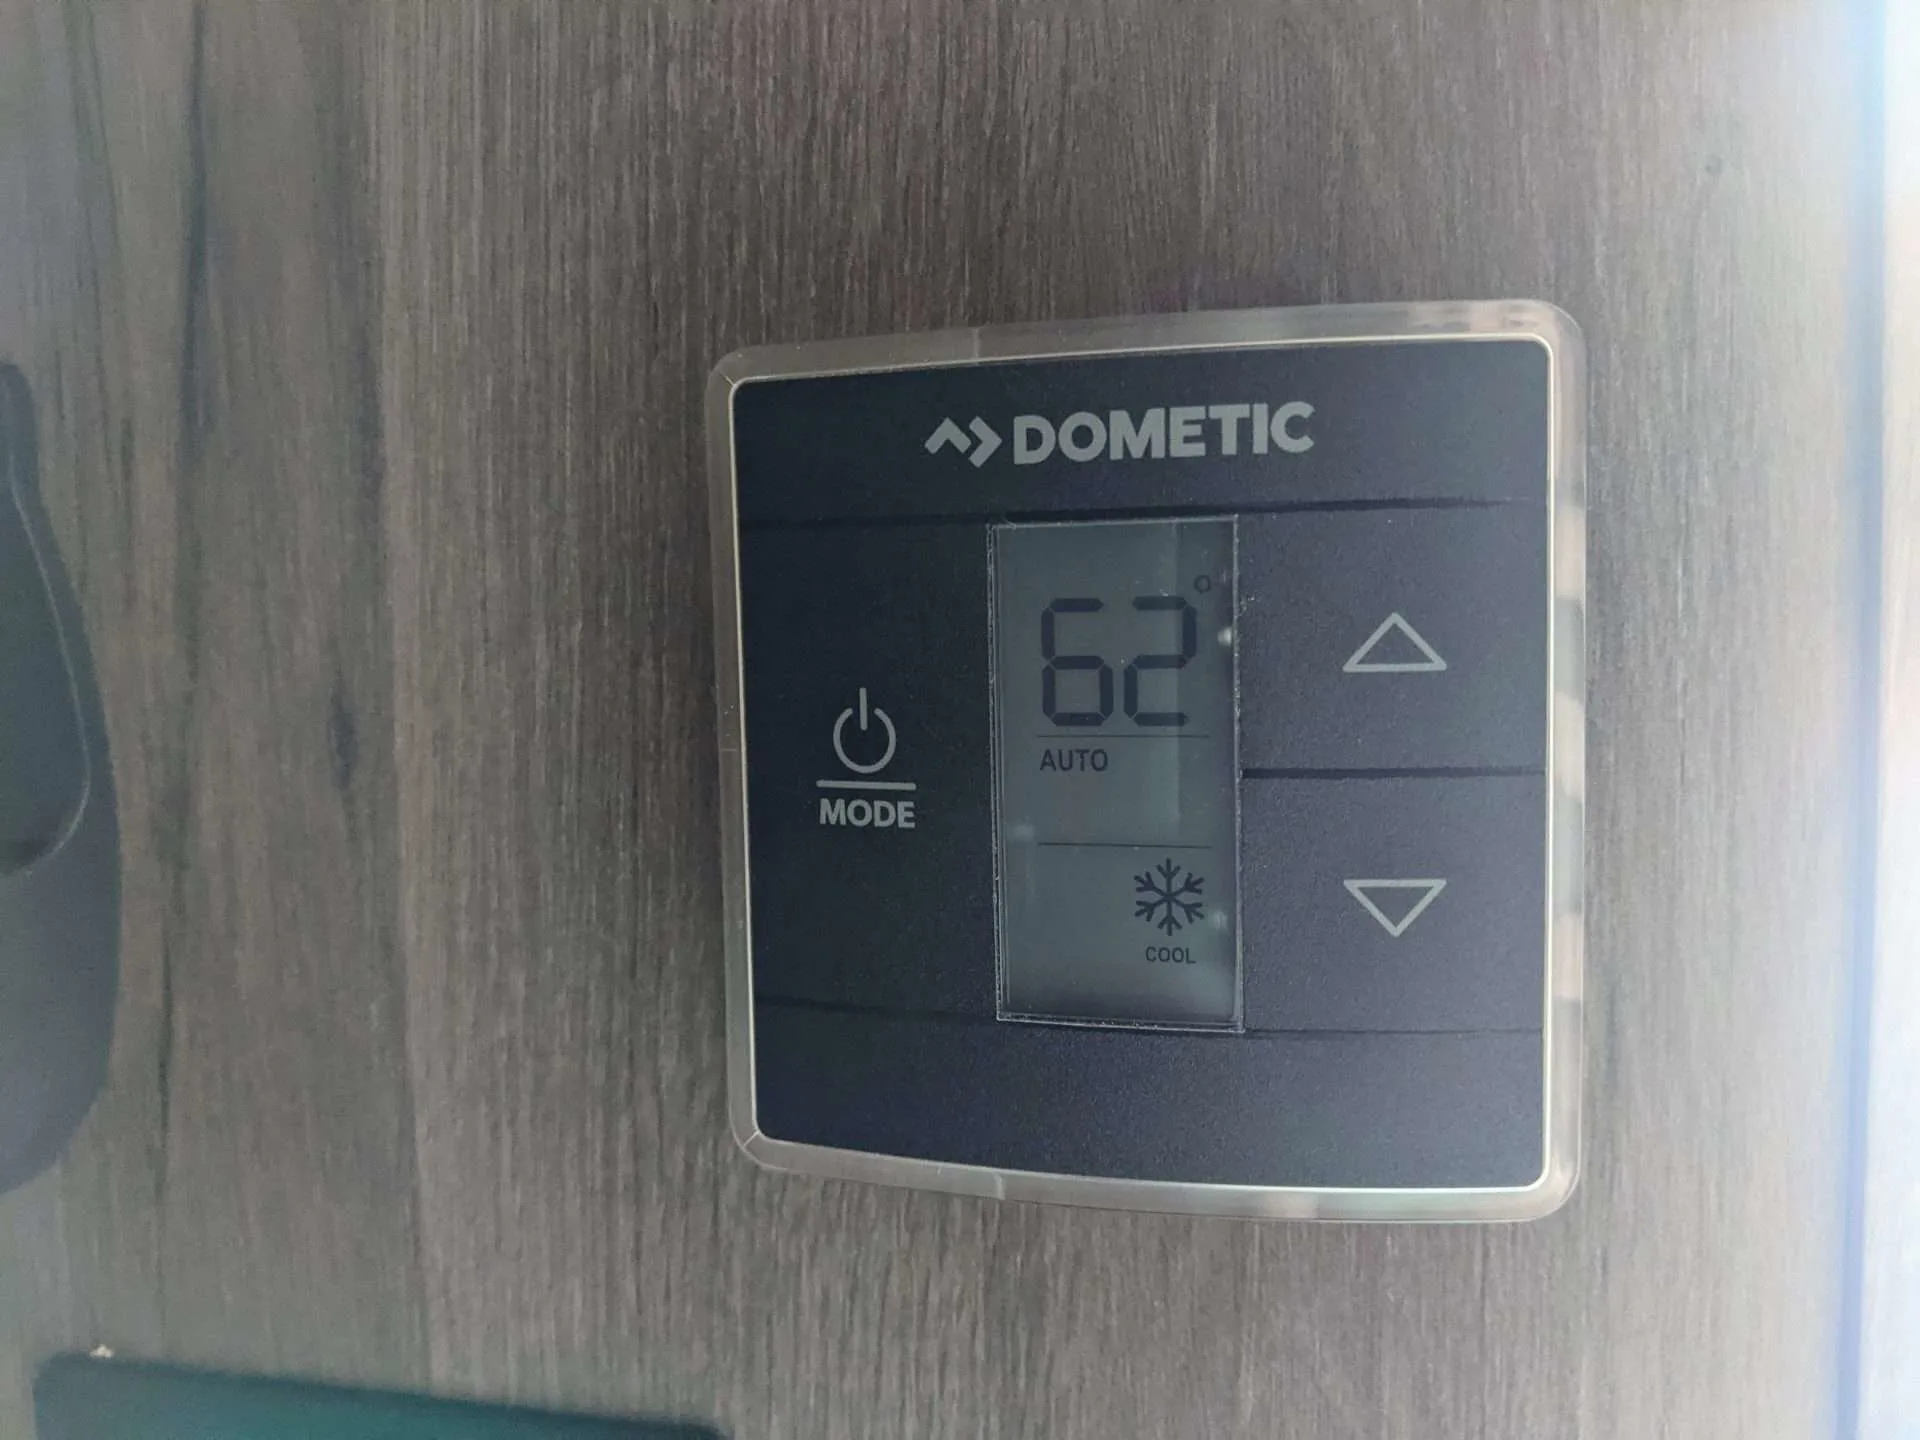 Dometic thermostat set at 62 degrees in RV.